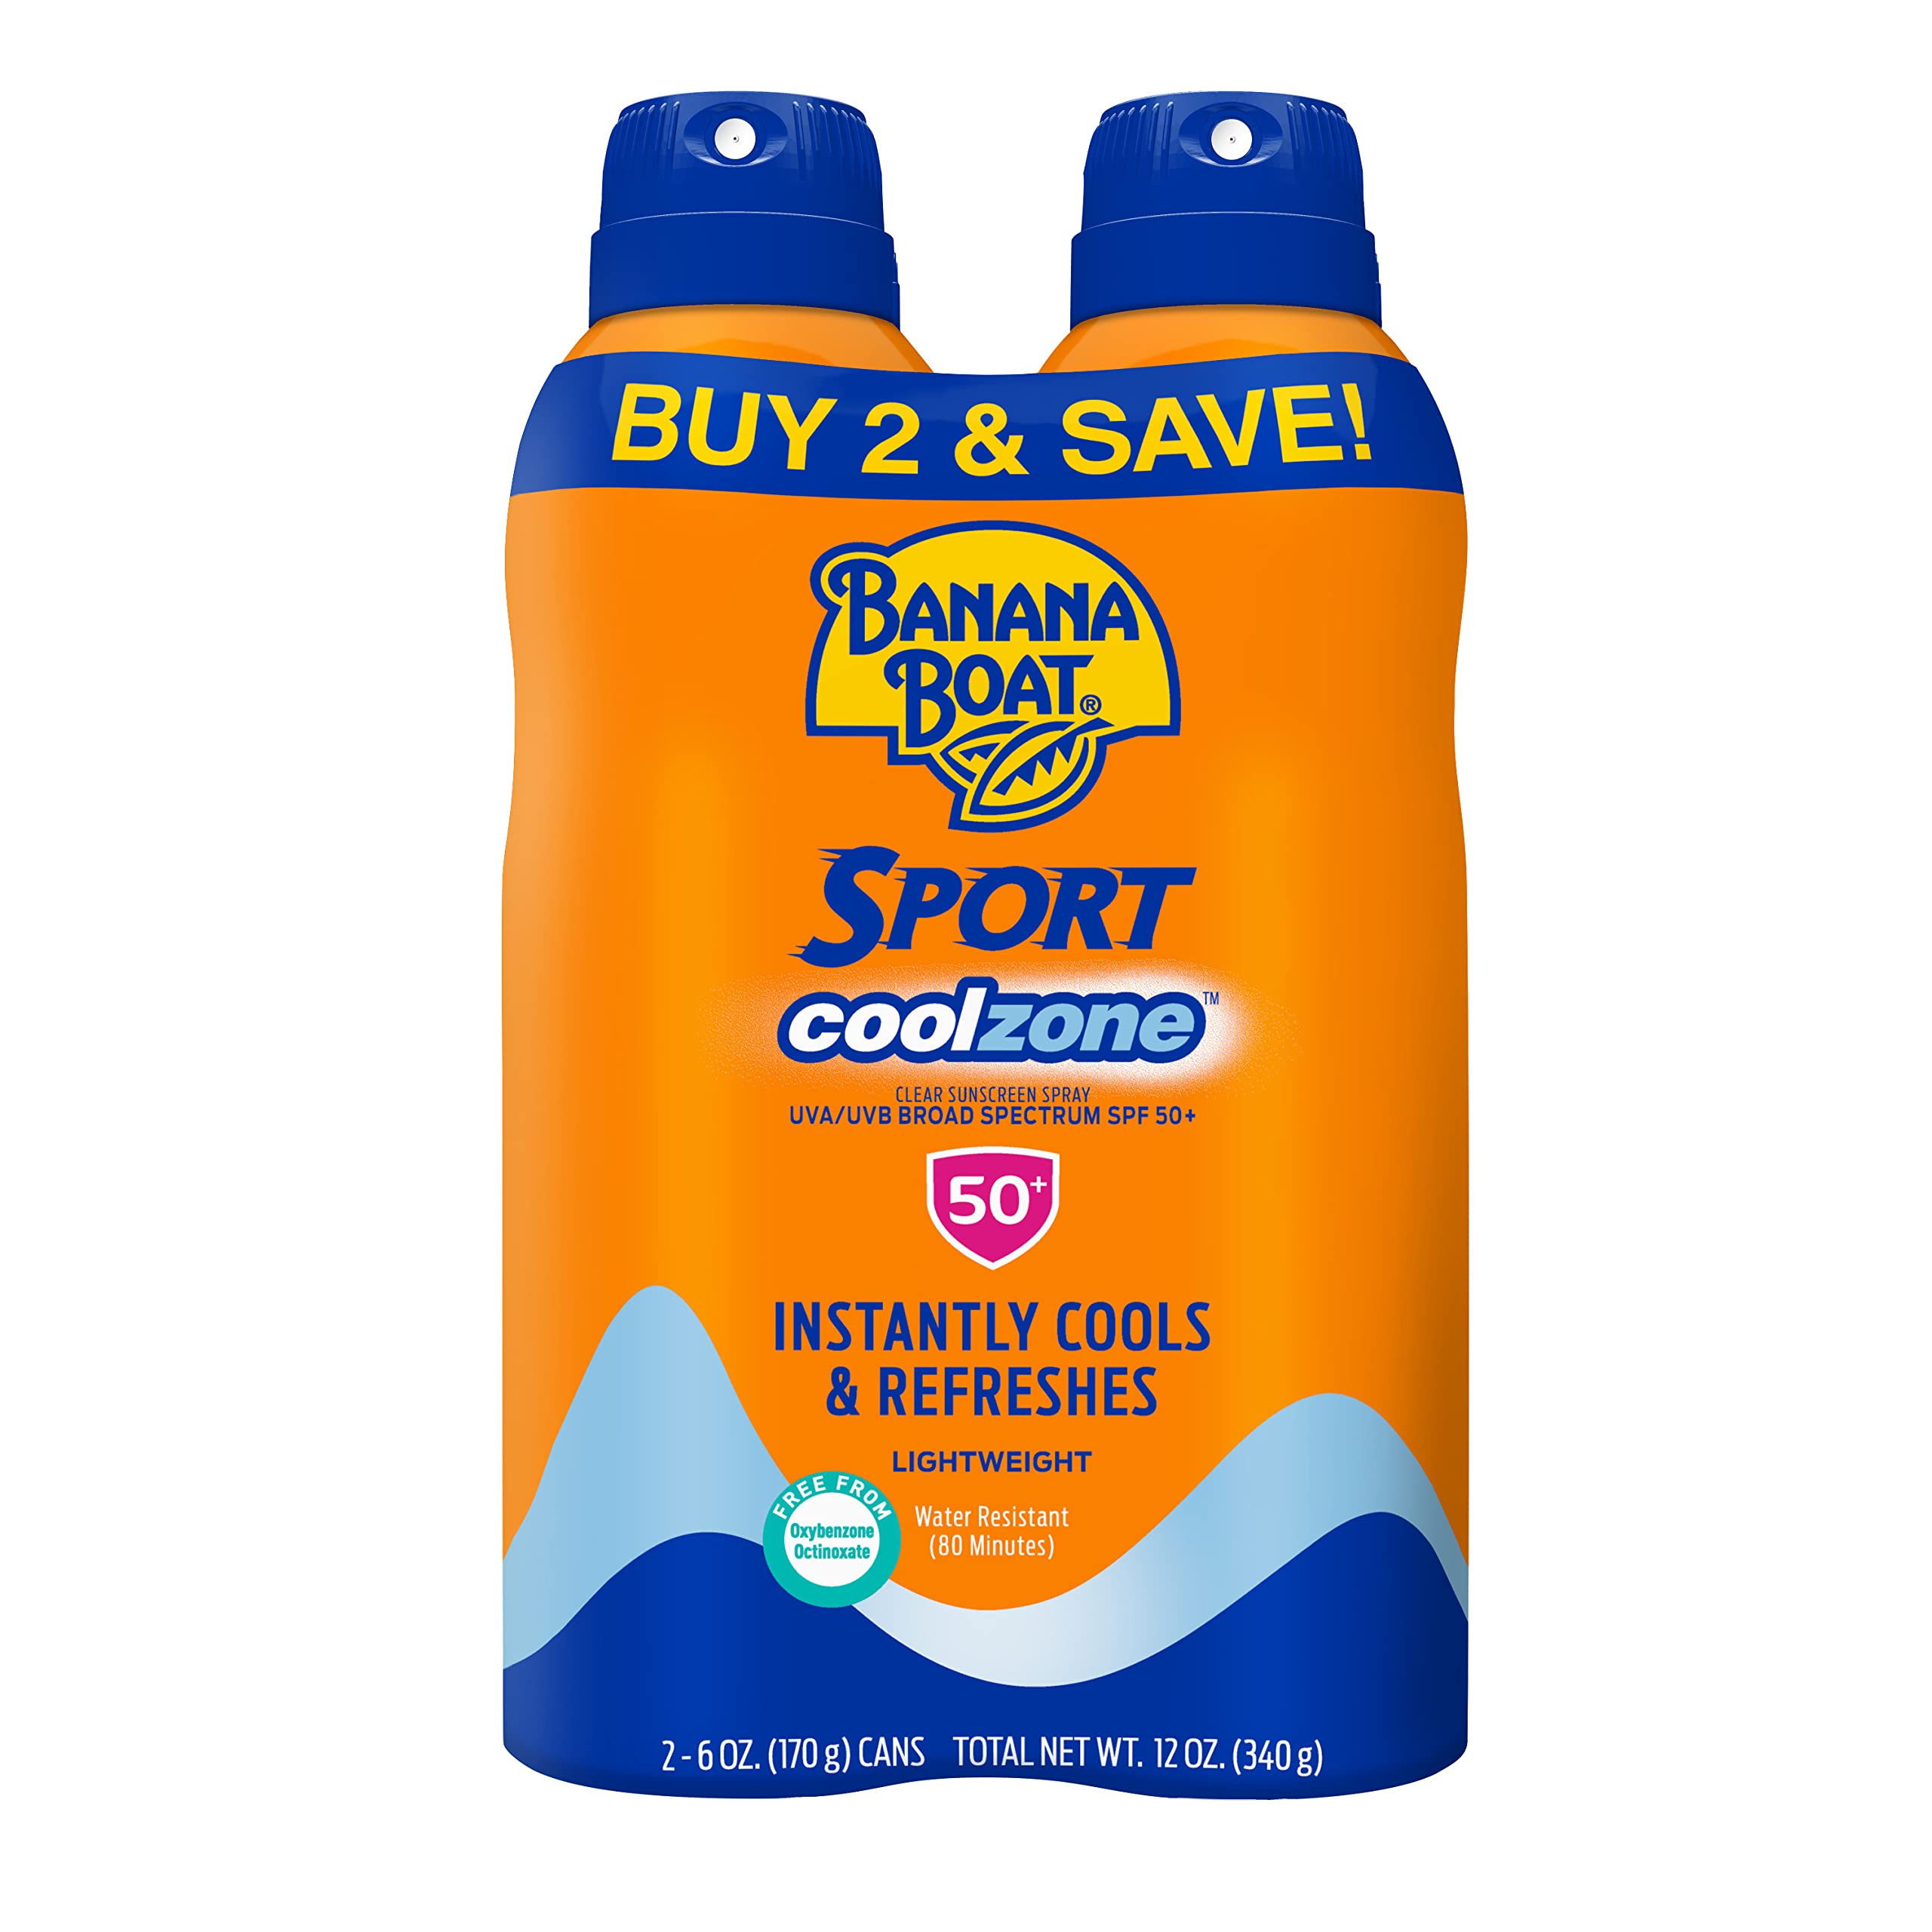 [4 cans @ $4.19/can] 2 x Banana Boat 50 SPF Sport Performance Cool Zone Broad Spectrum Sunscreen Spray, Twin Pack, 6 oz as low as $16.74 w/ S&S